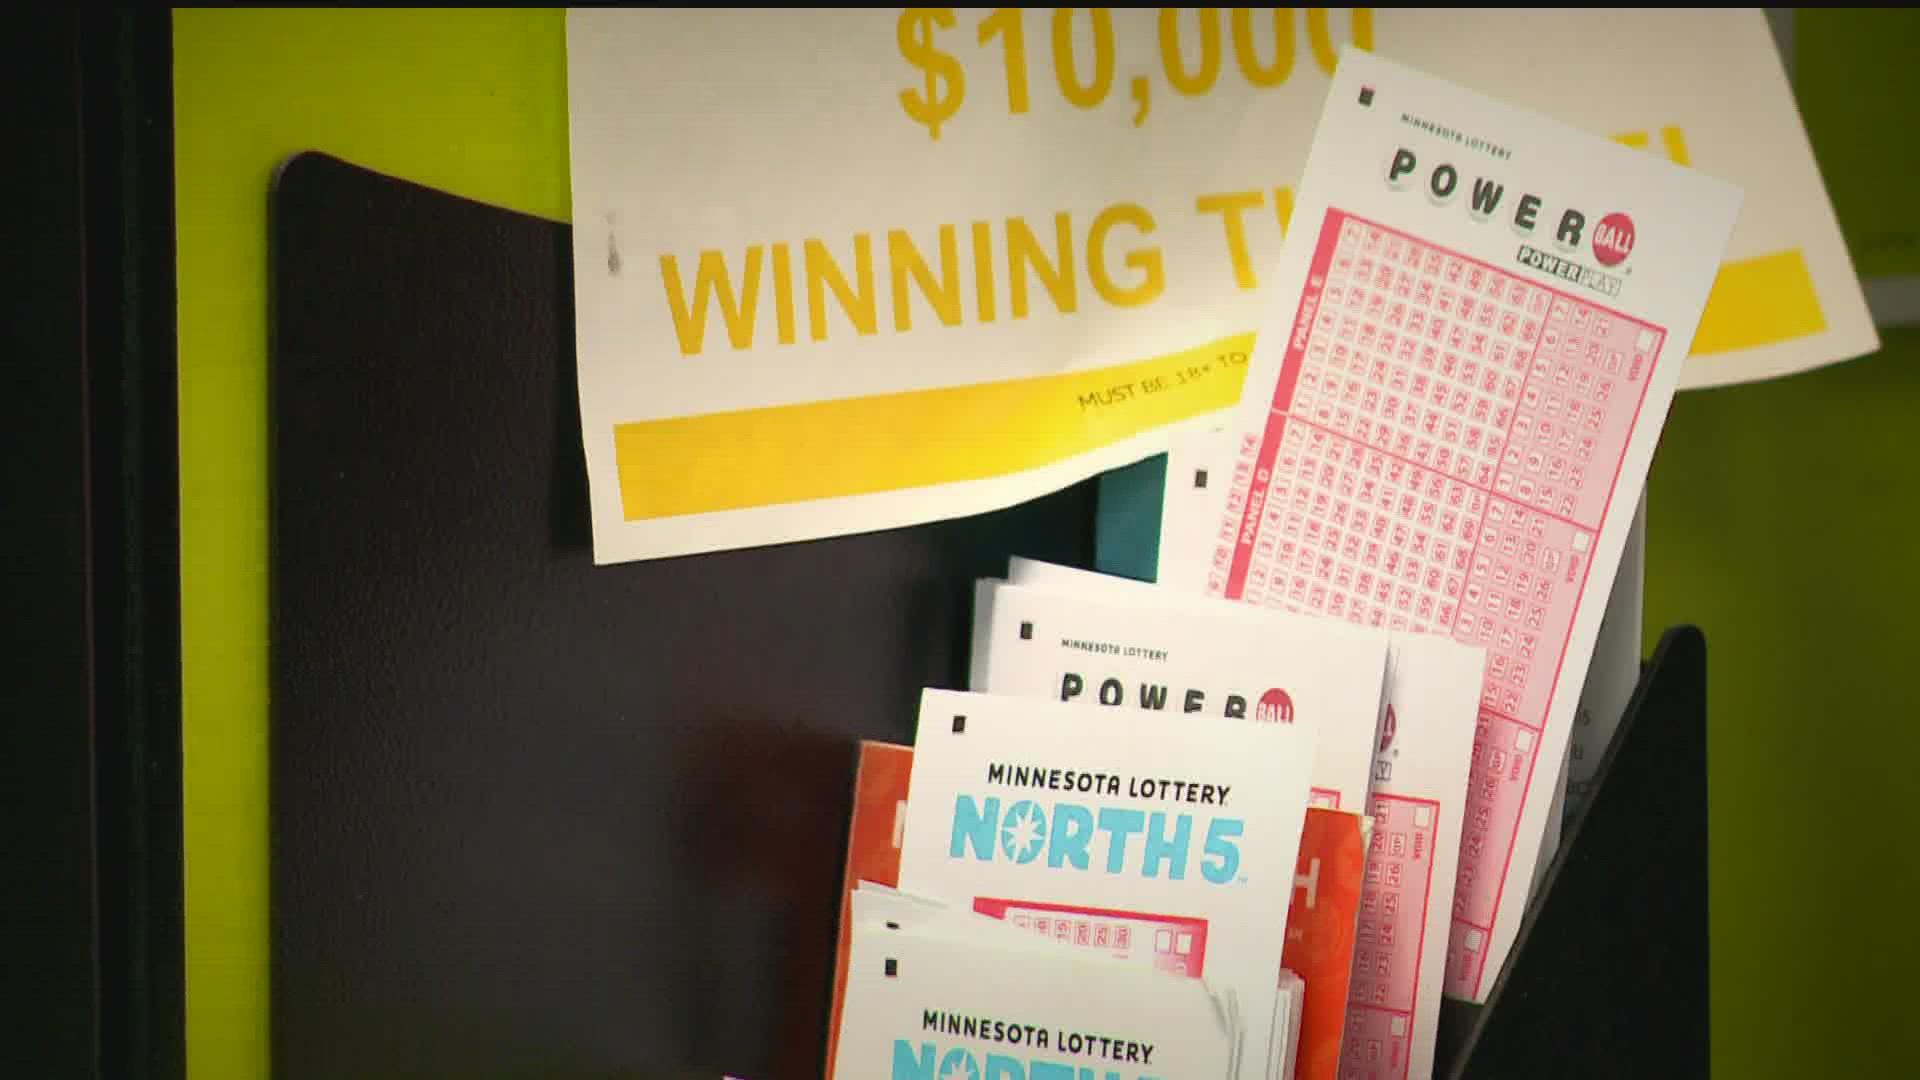 After 39 drawings without a grand prize winner, the Powerball jackpot has reached an astronomical sum, cementing it as the biggest U.S. lottery jackpot ever.